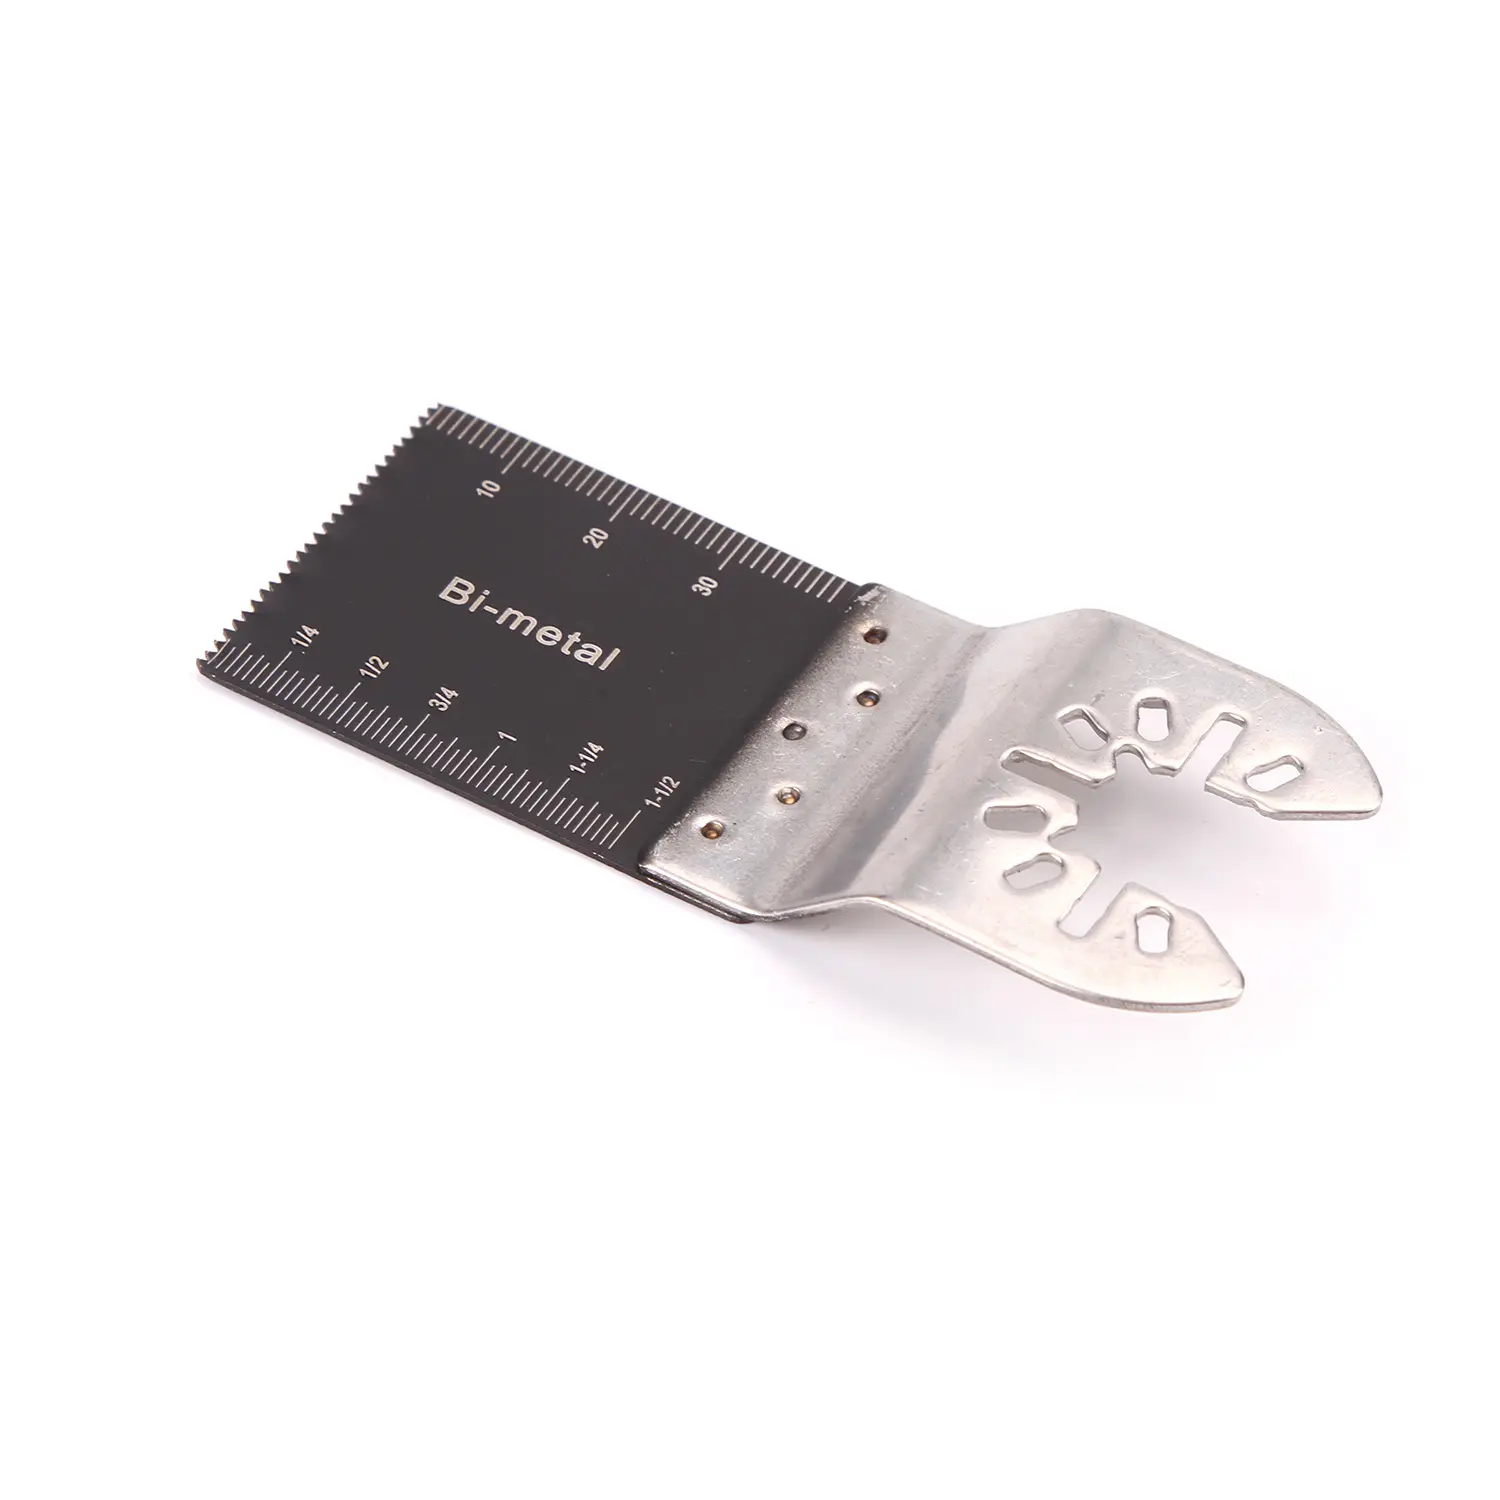 Wholesales Oscillating Multi Tool Saw Blades Use for Wood and Metal Cutting